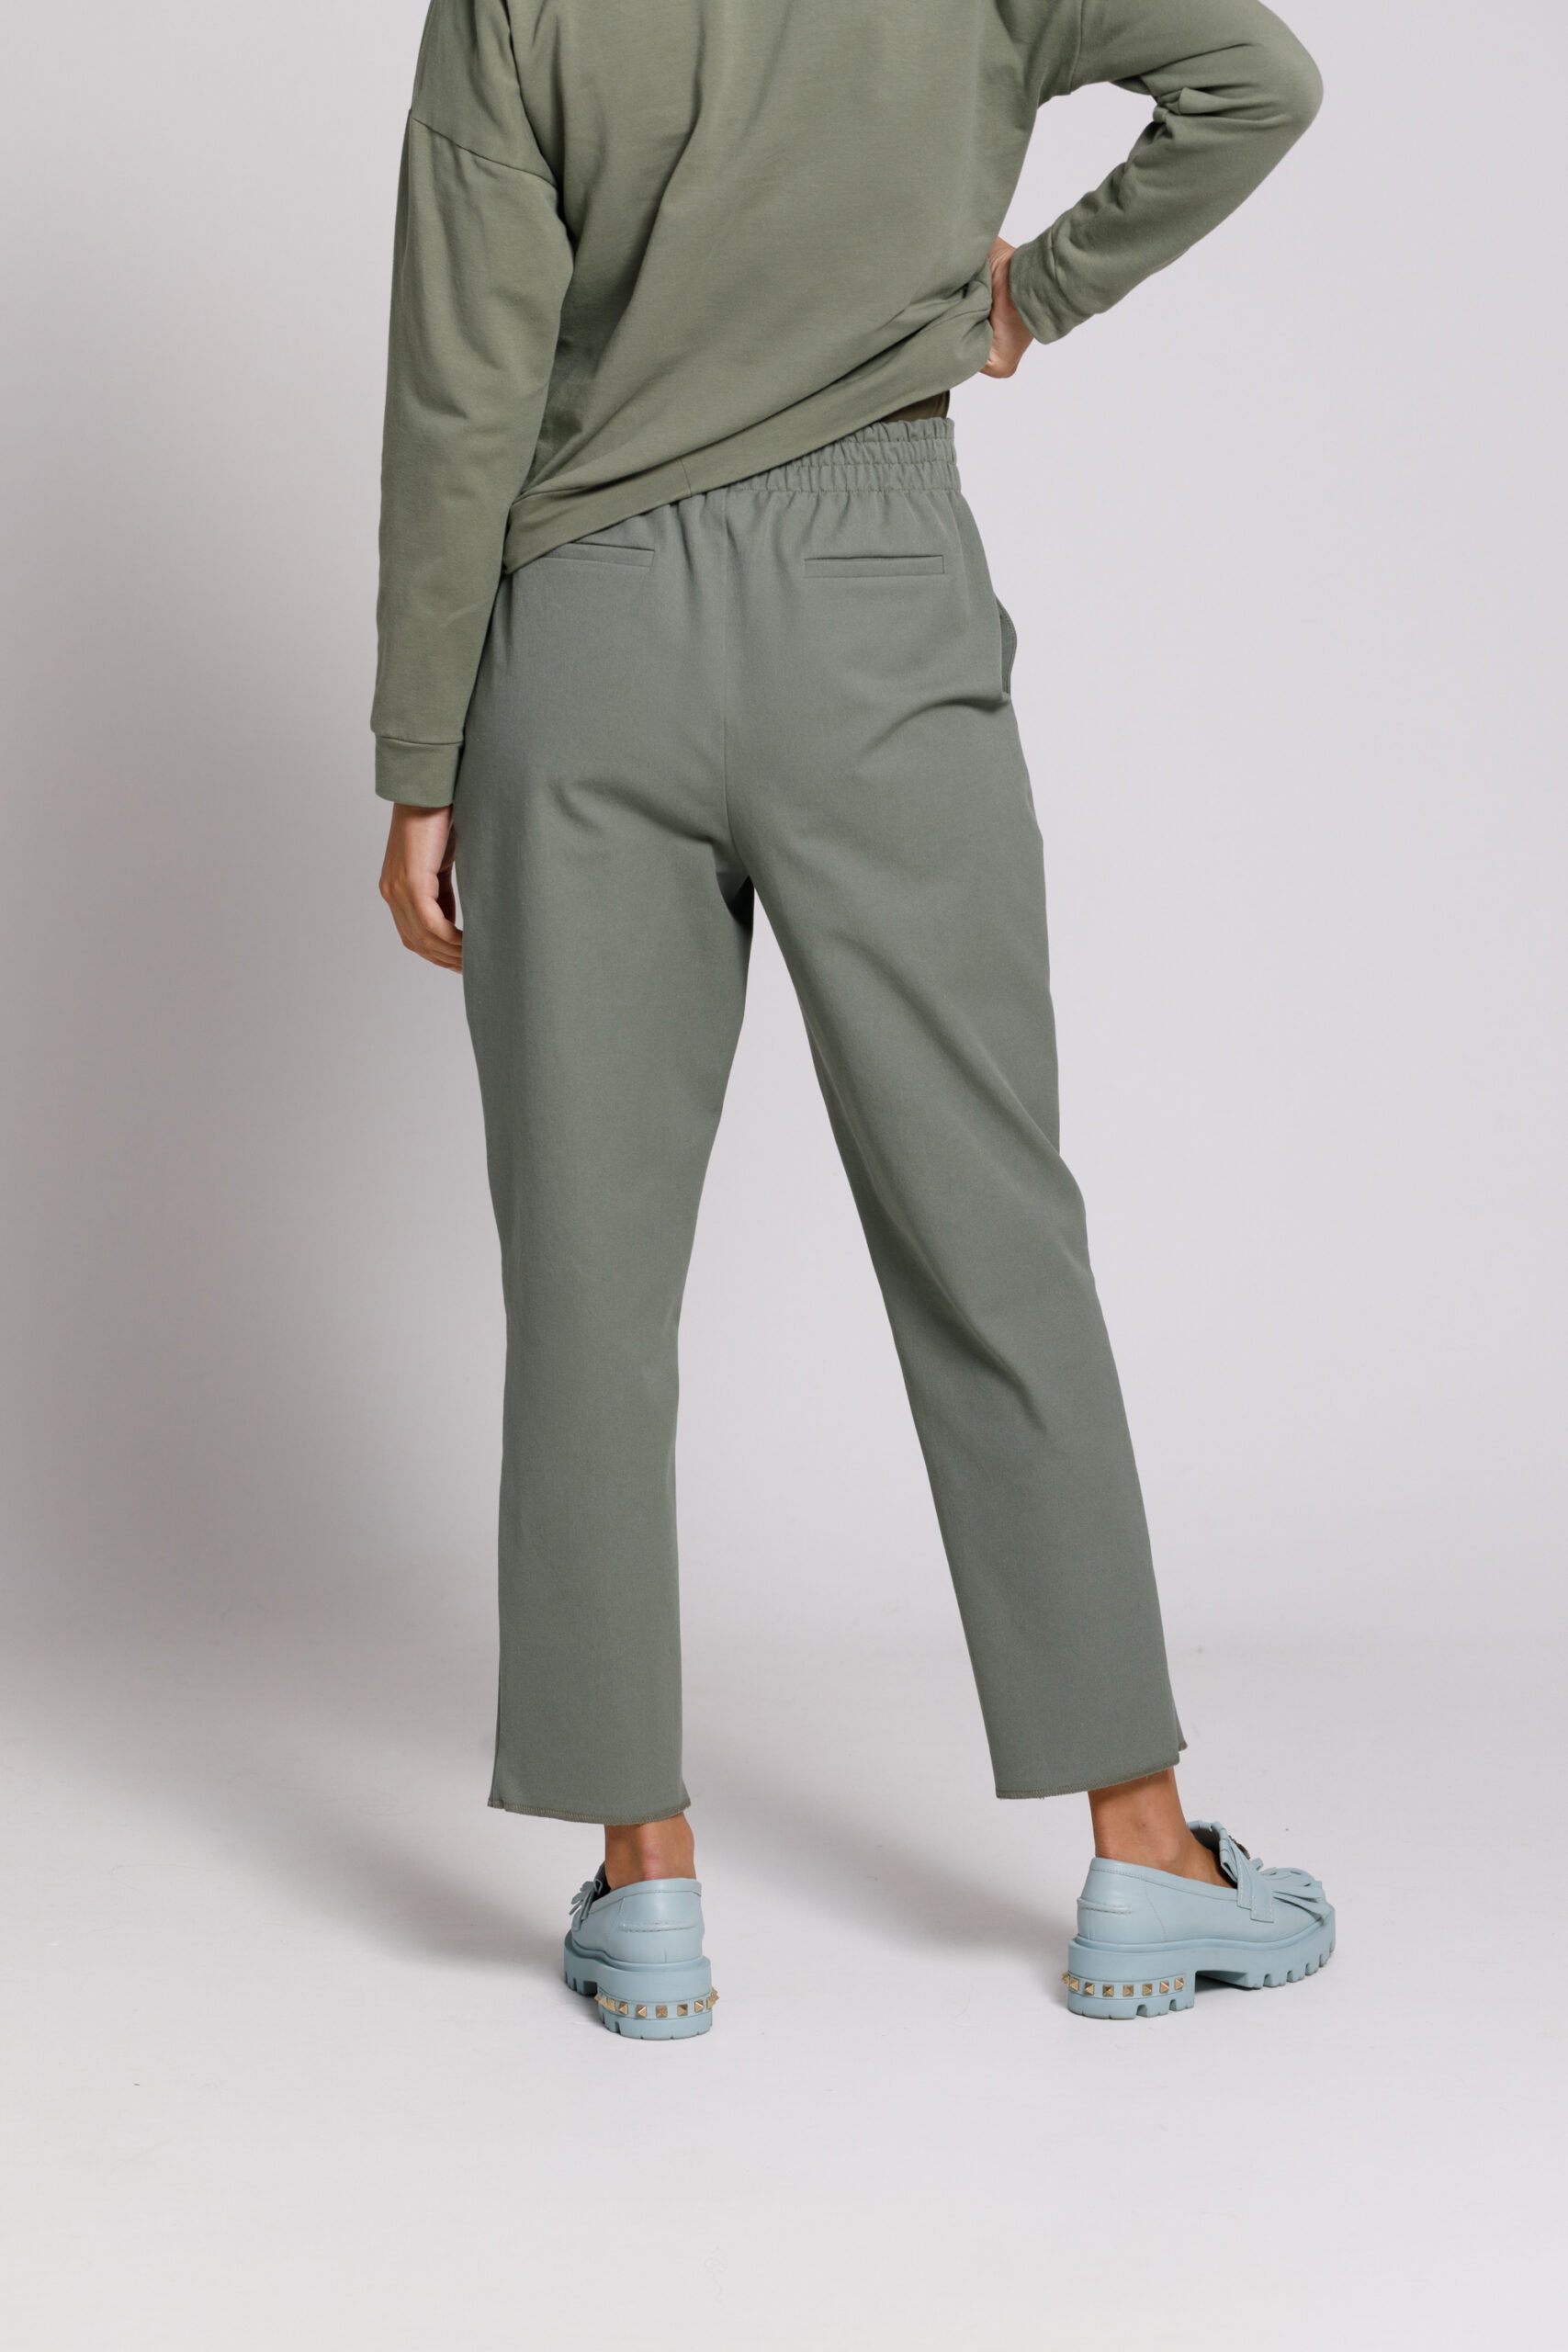 RADA casual olive pants with gold buttons. Natural fabrics, original design, handmade embroidery